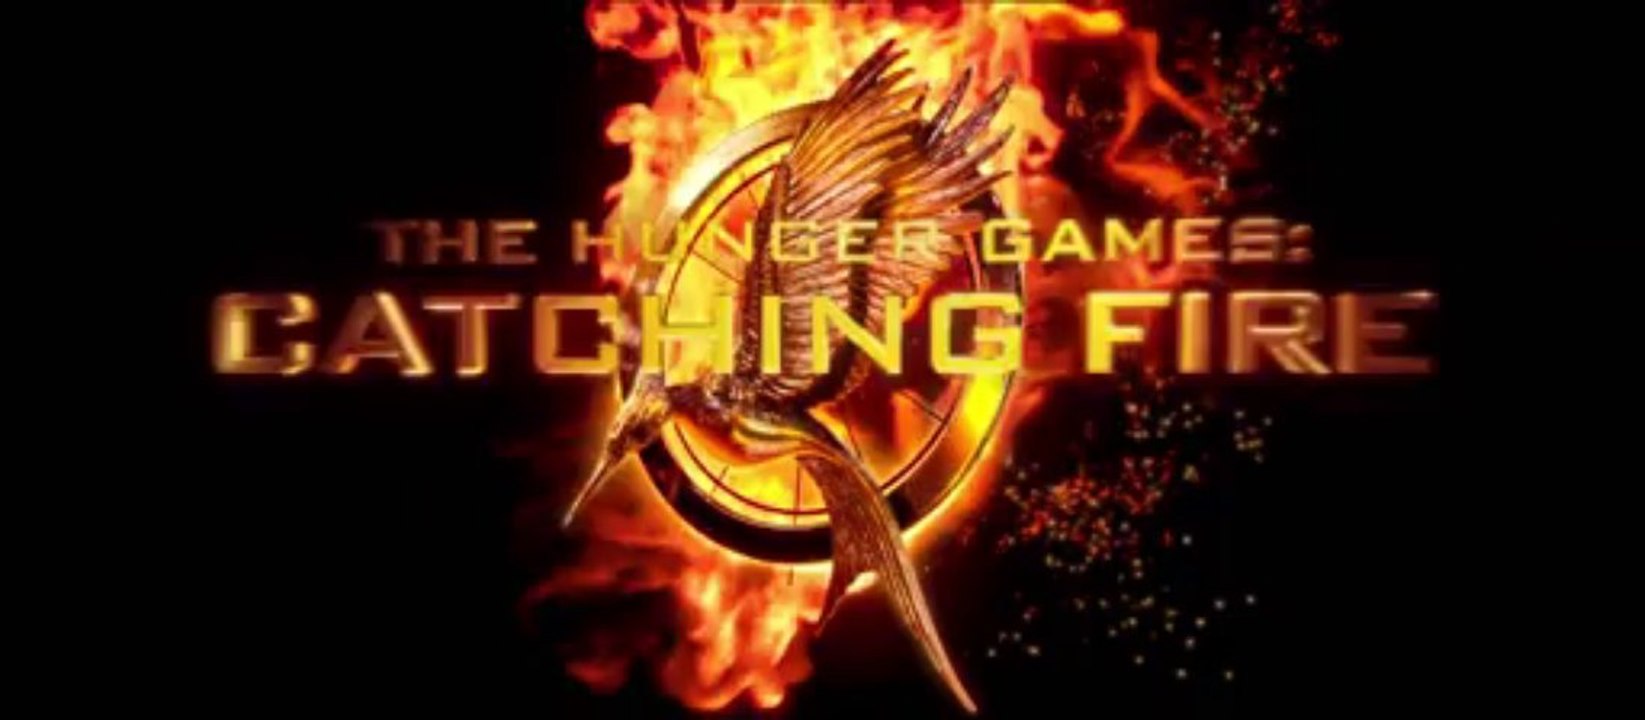 Hunger Games Catching Fire Trailer 1